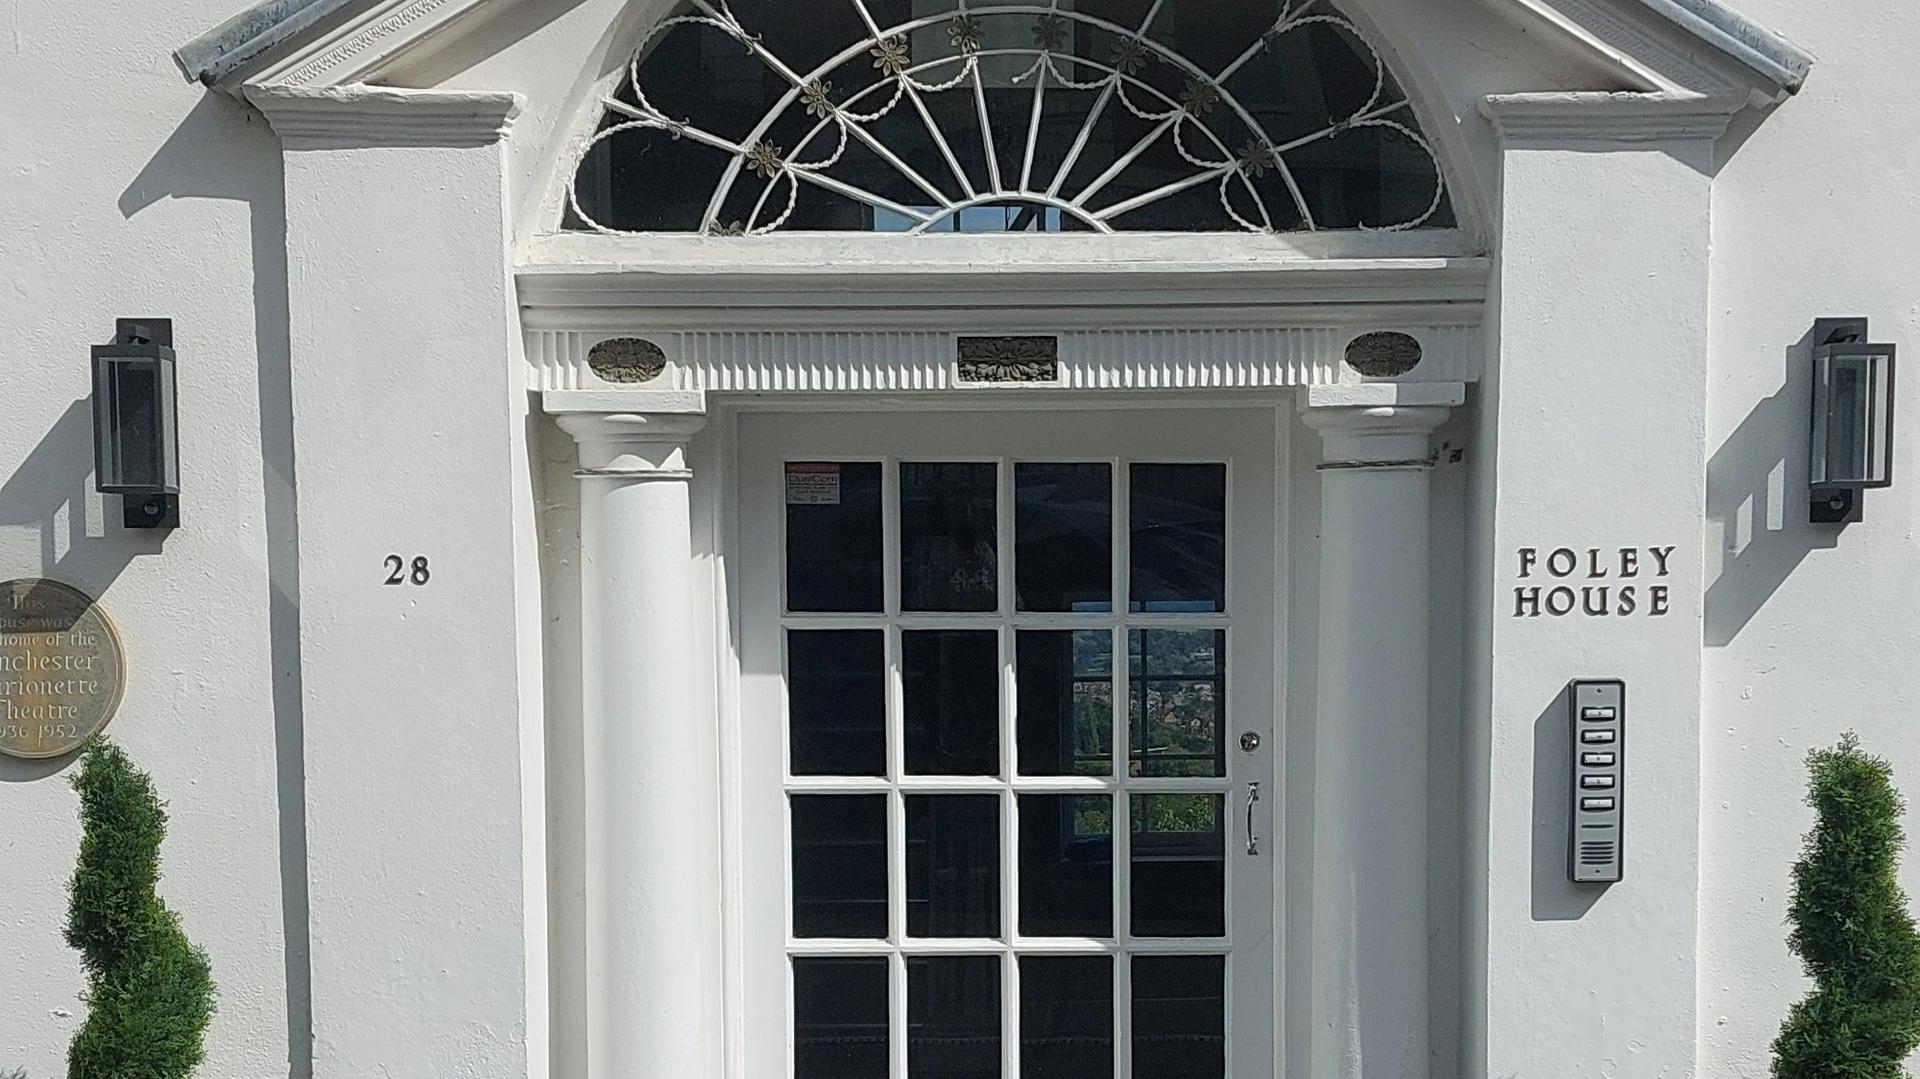 Photograph of the front door of a white Georgian villa